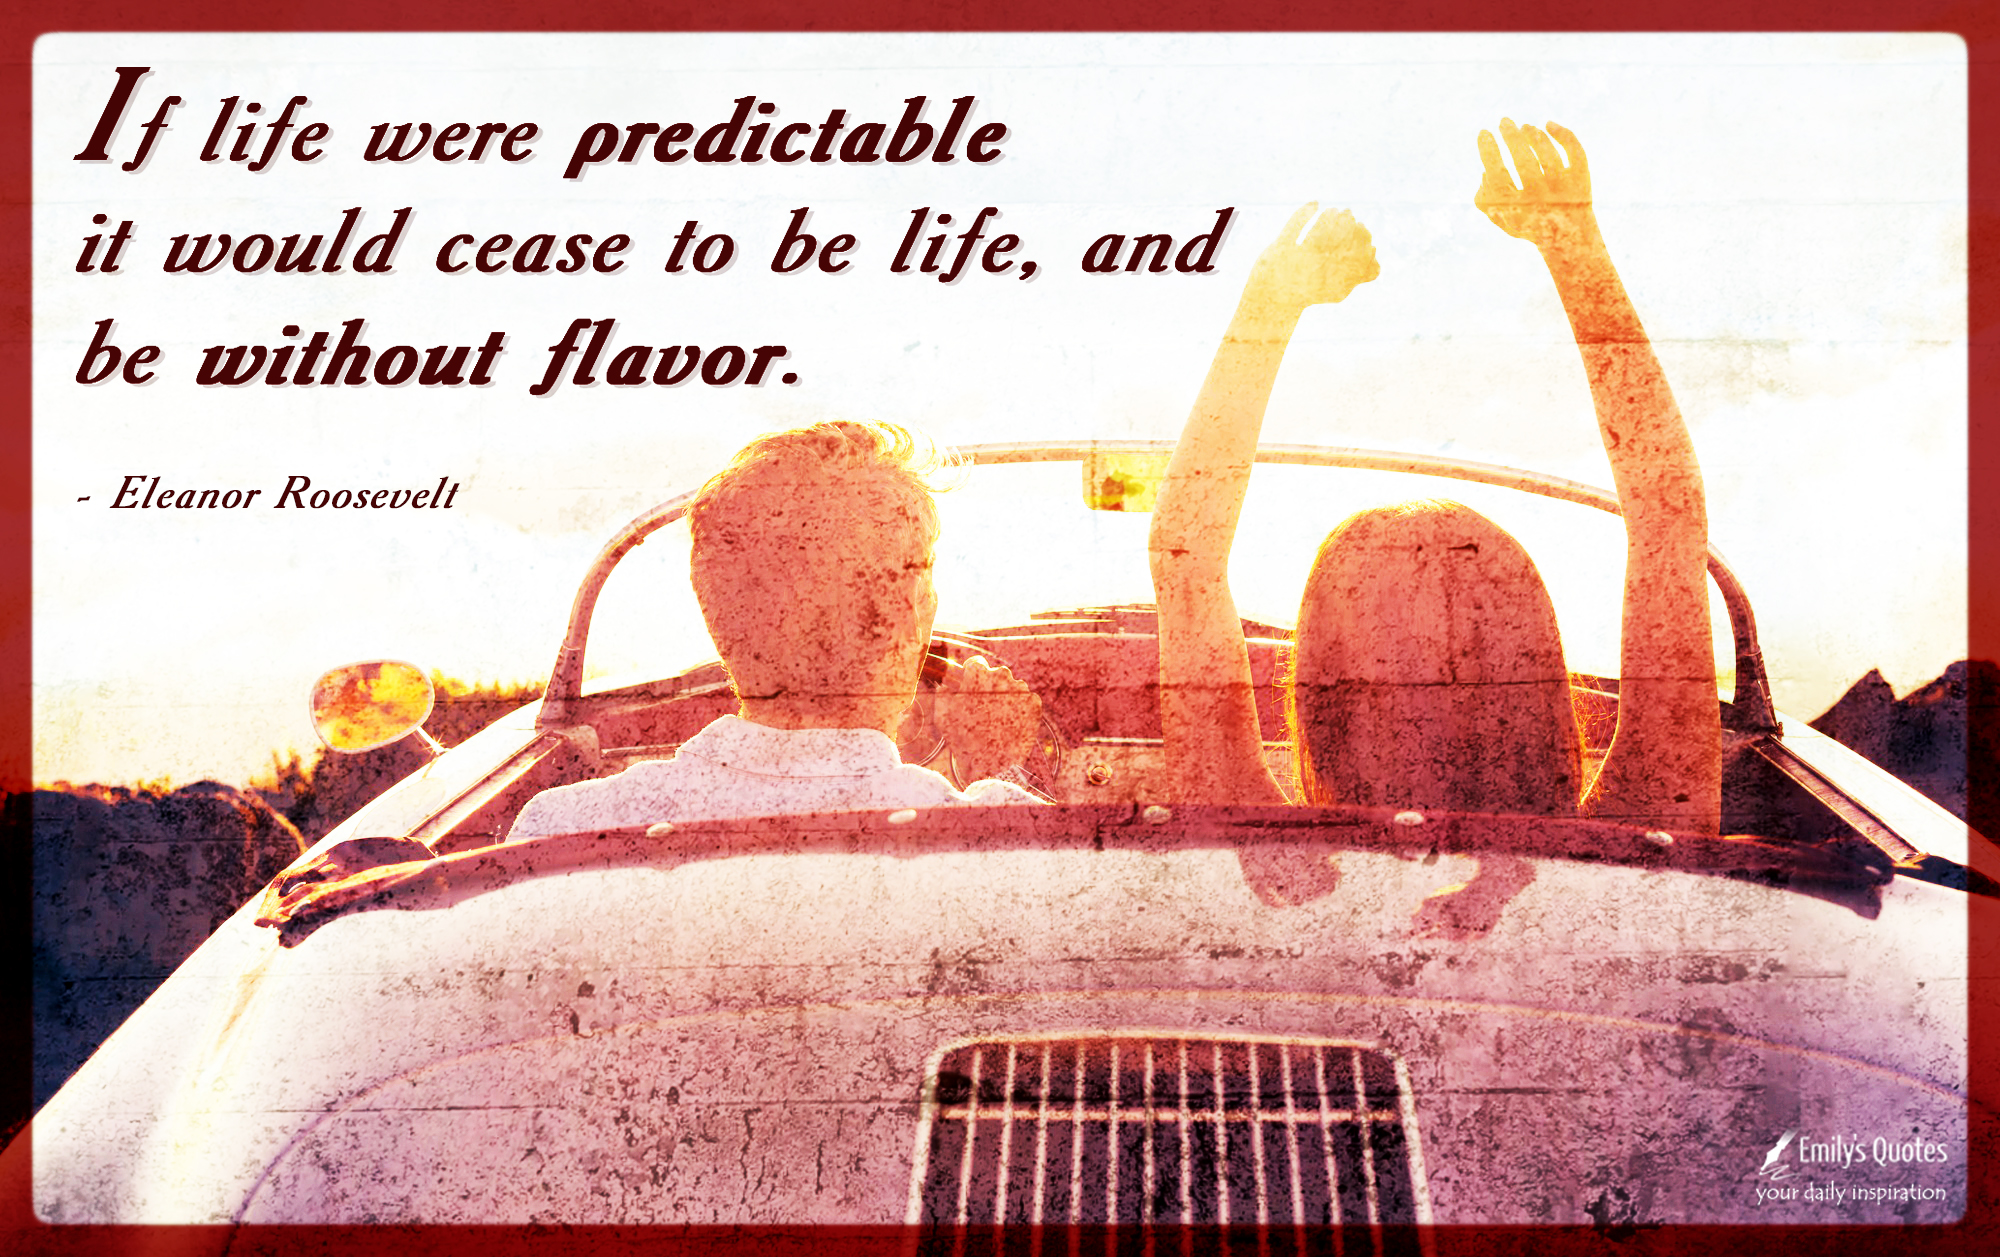 If life were predictable it would cease to be life, and be without flavor